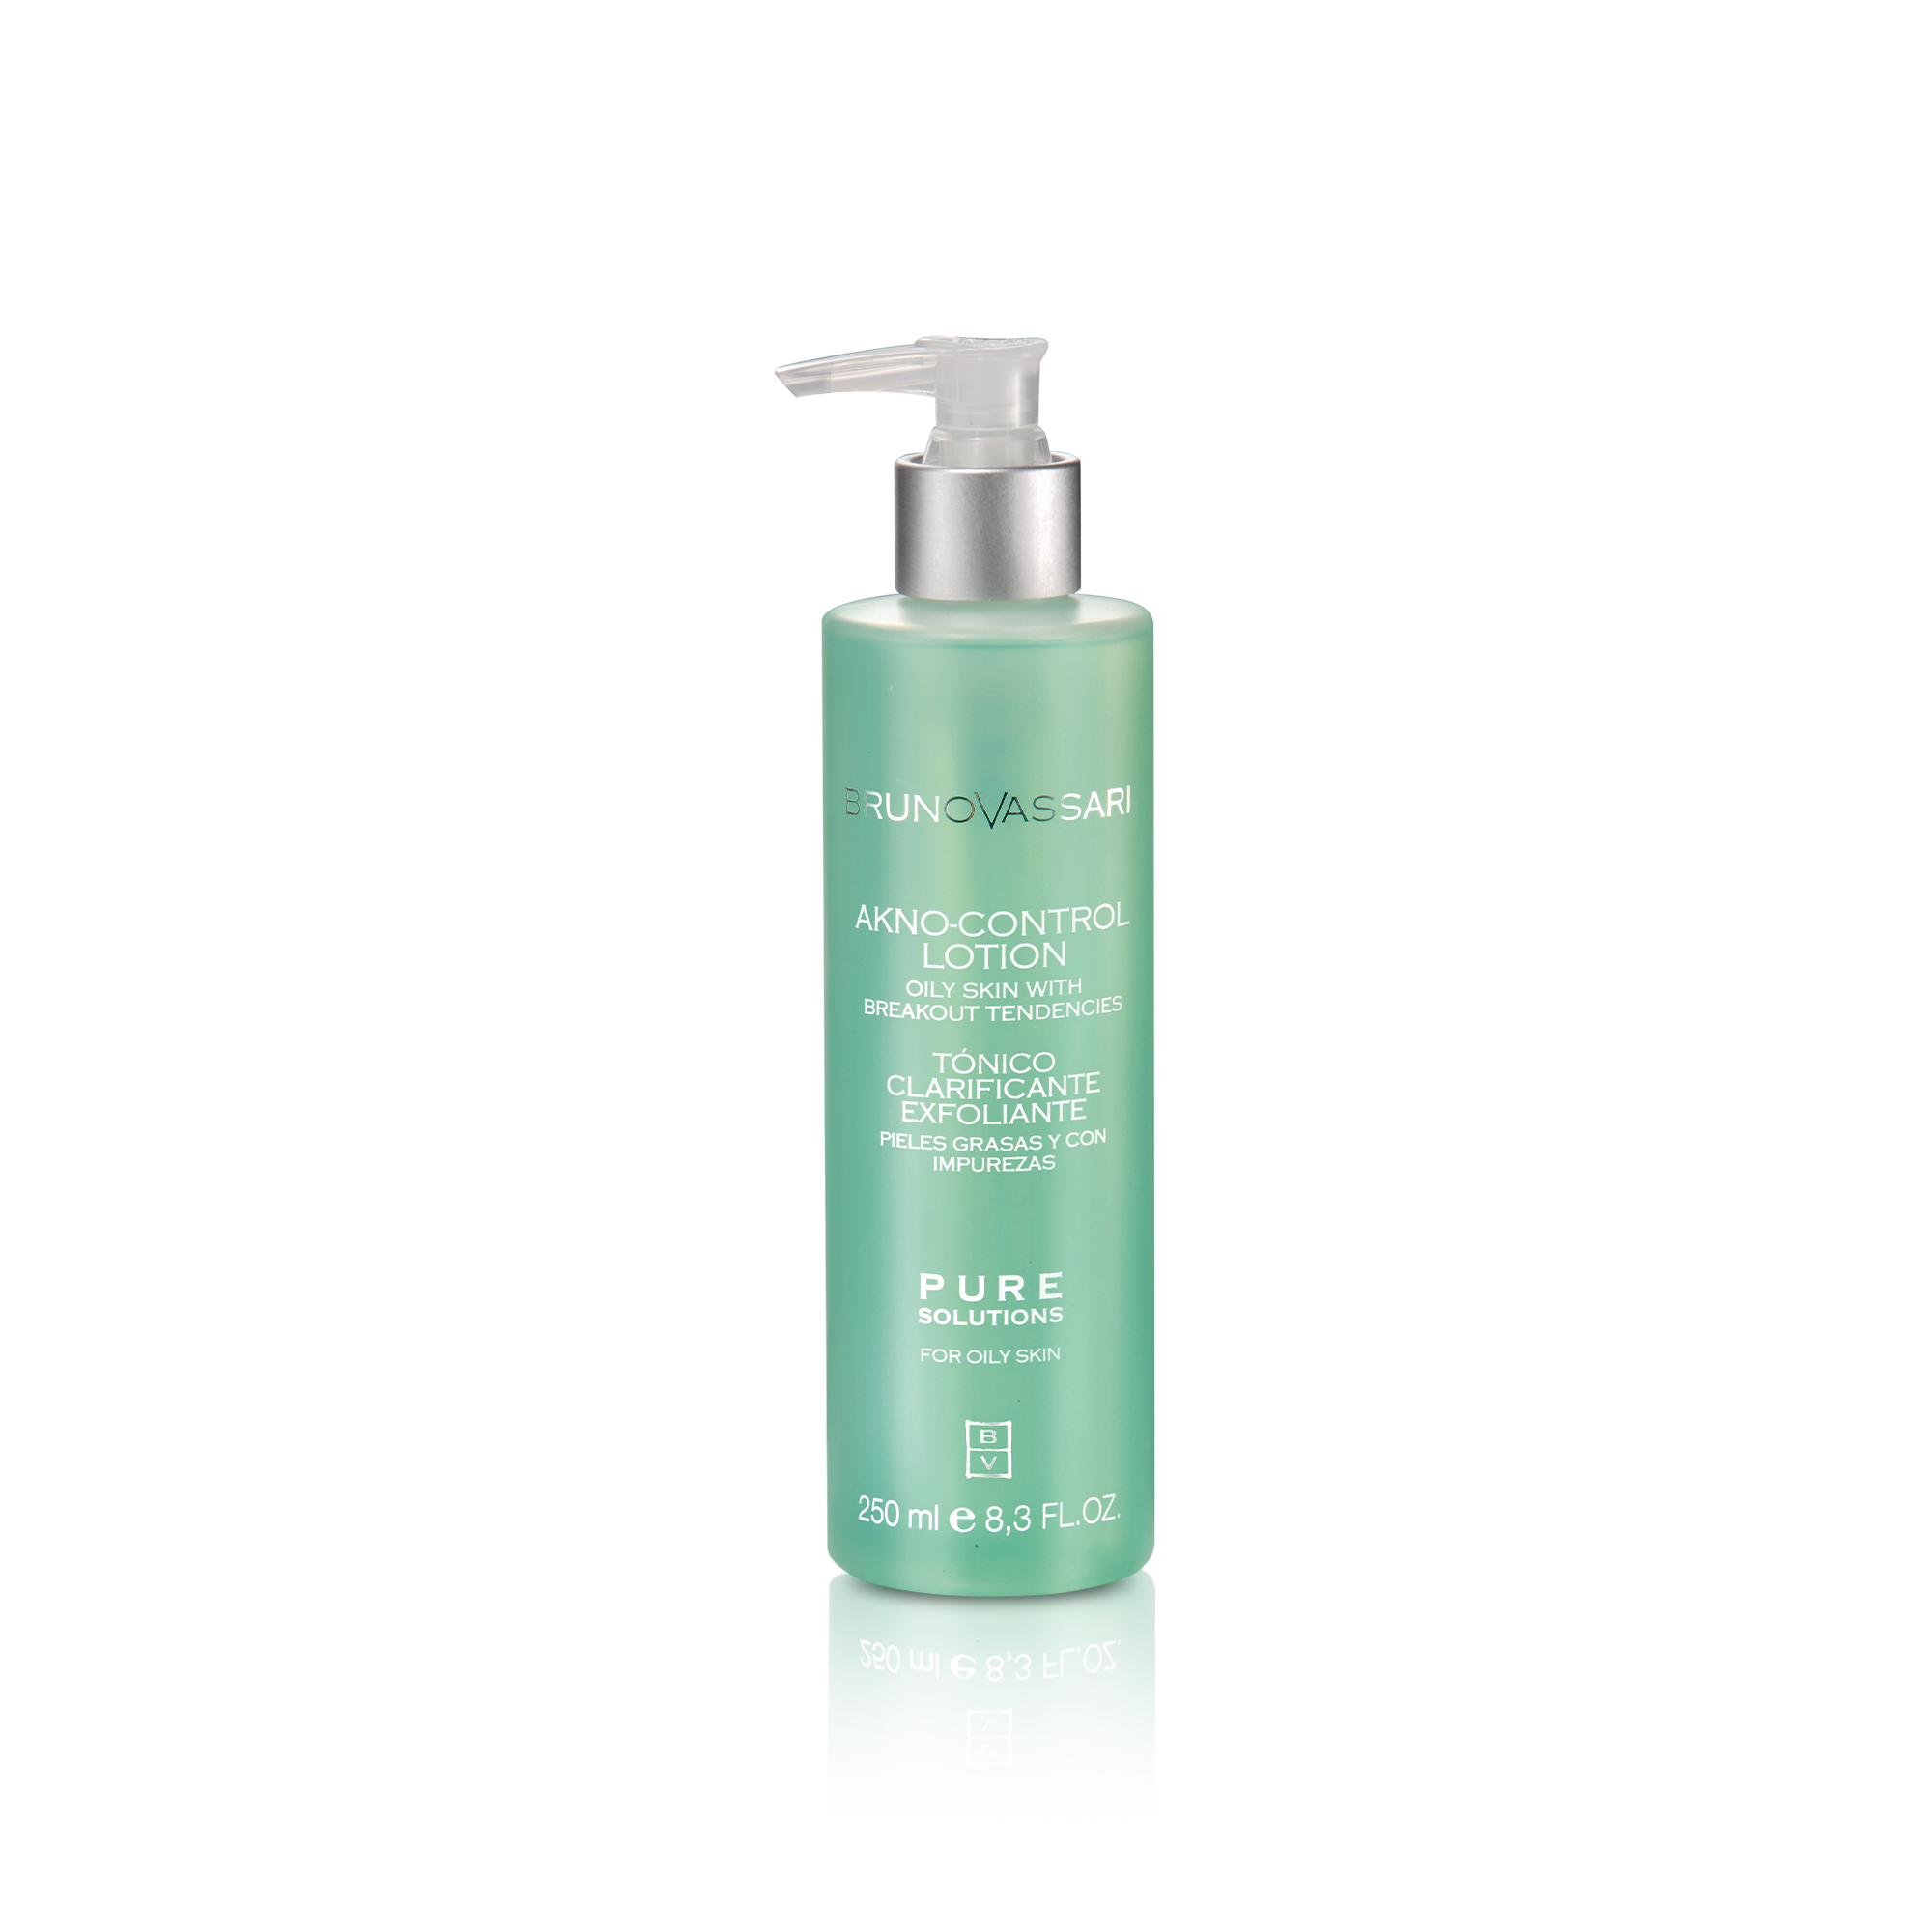 Pure Solution Akno-Control Lotion